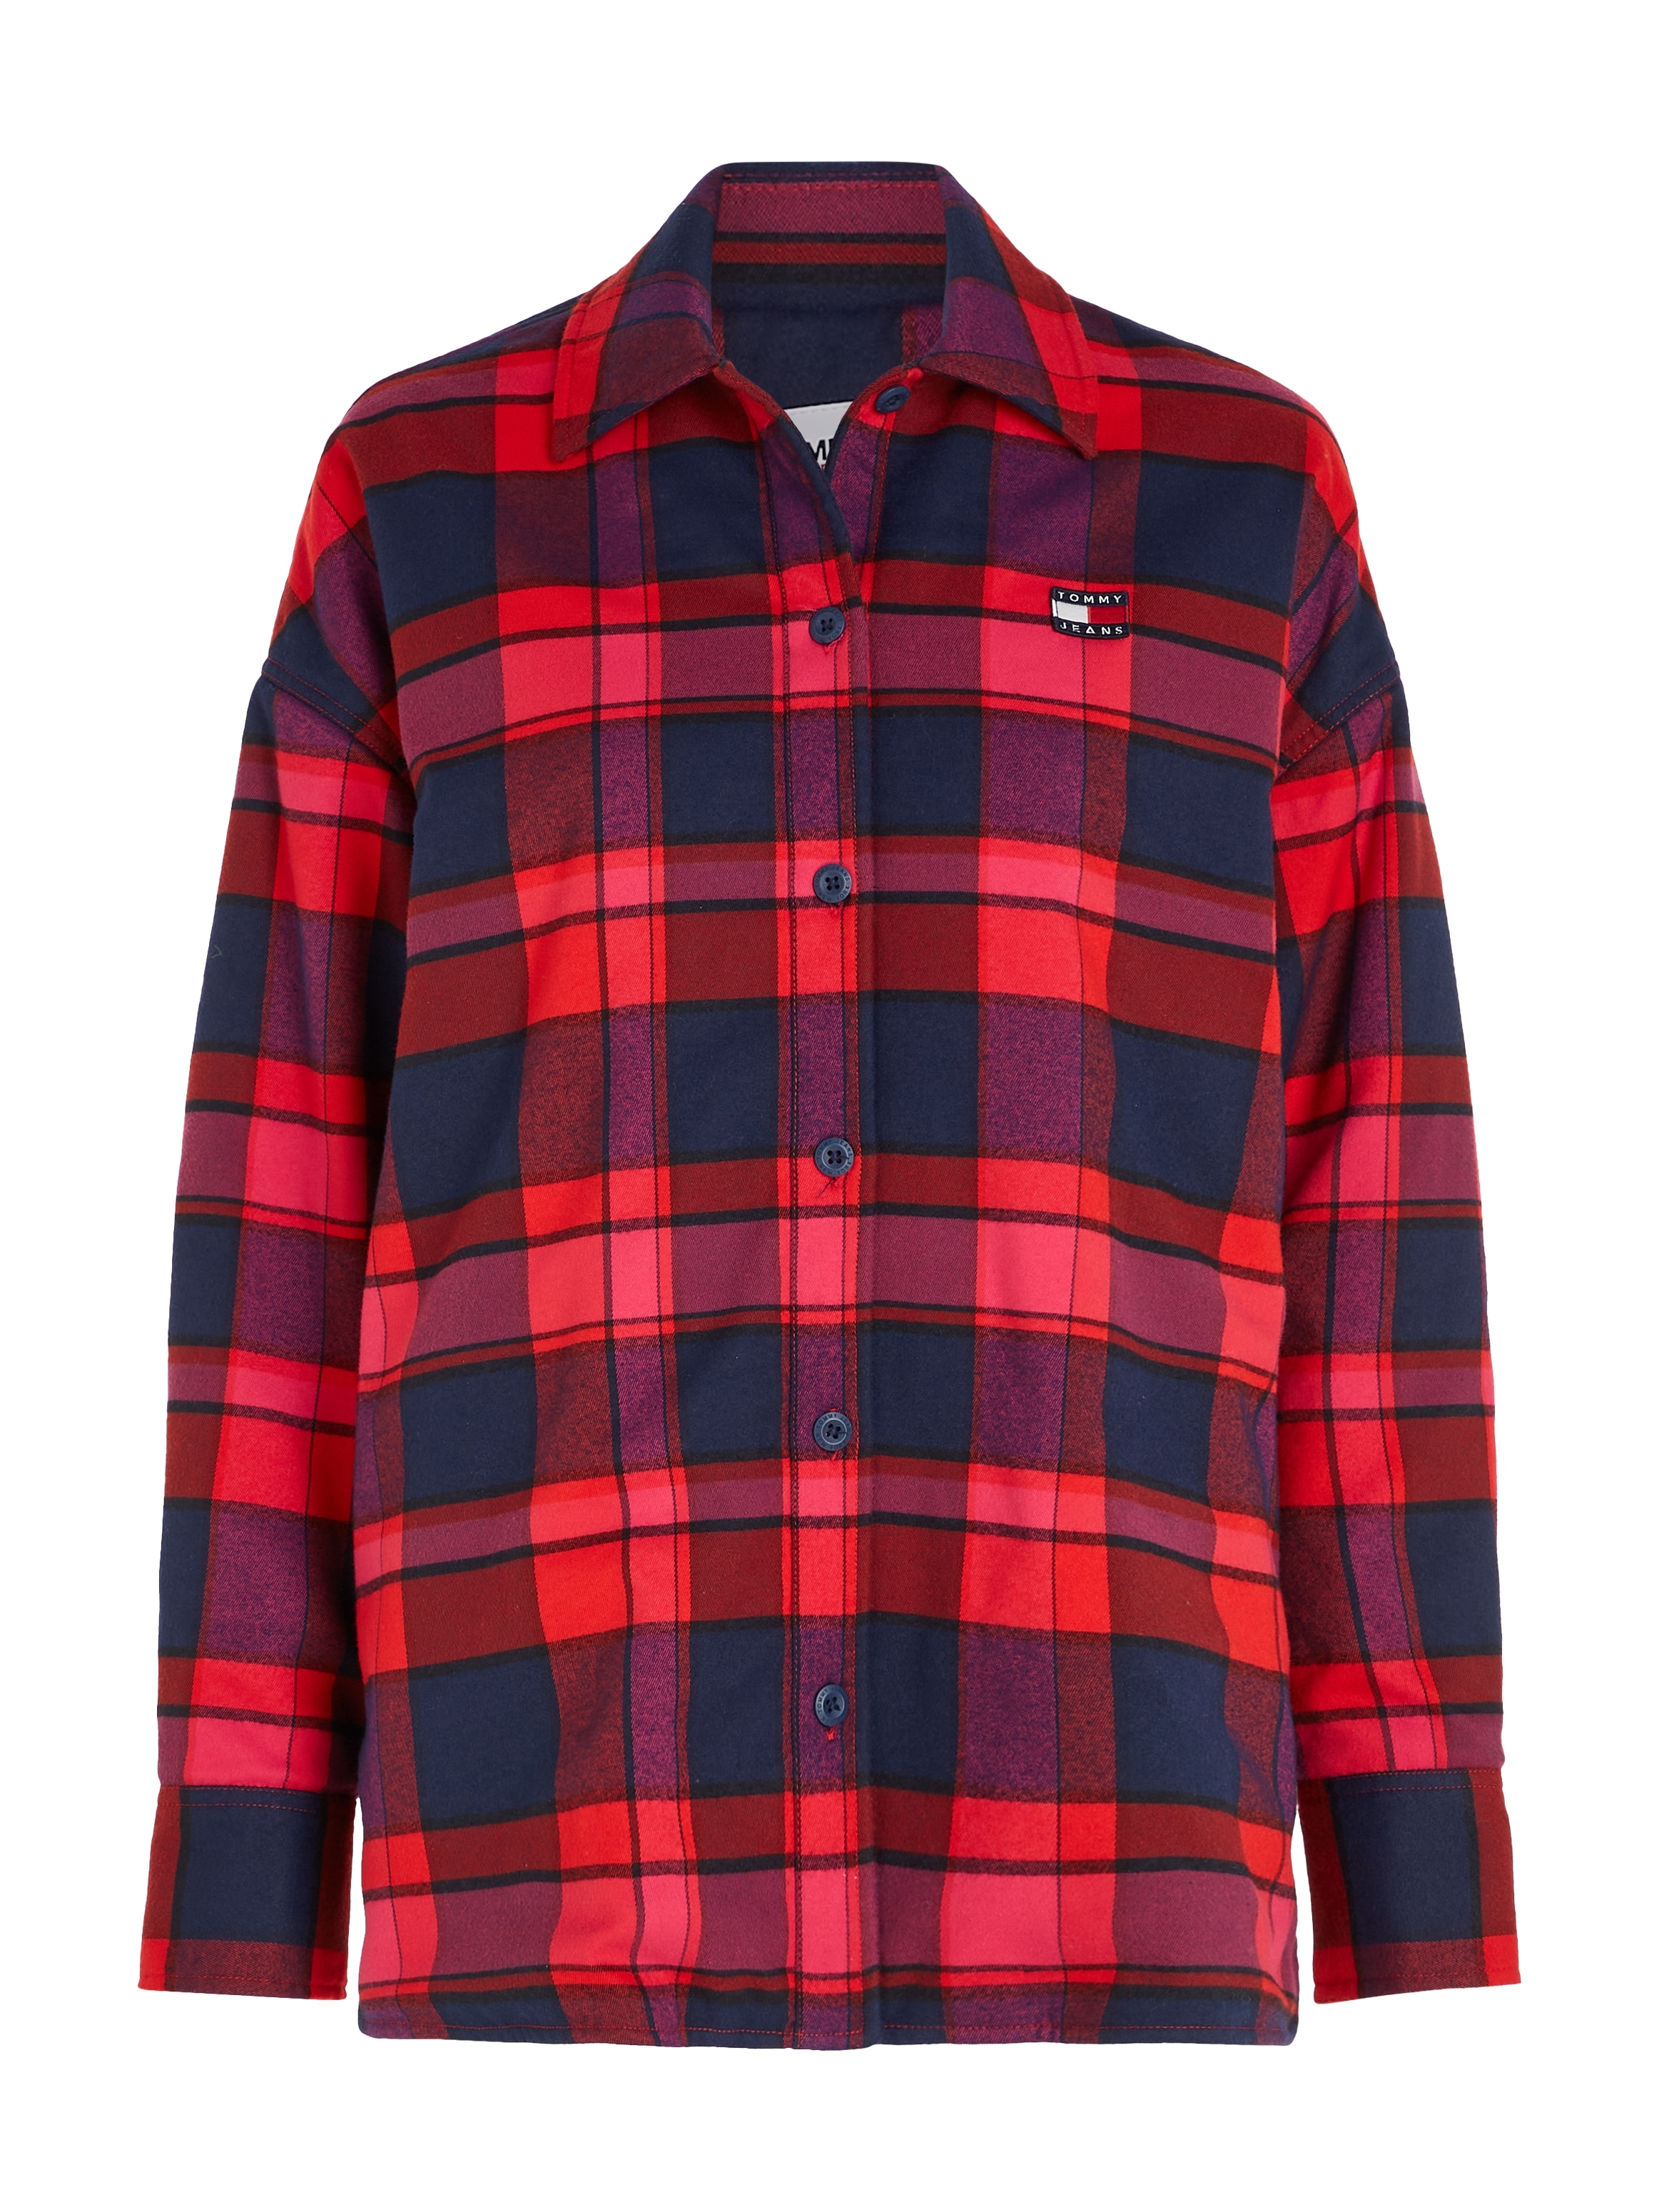 OVS Tommy OTTO »TJW Hemdbluse Label Tommy CHECK Jeans Jeans OVERSHIRT«, mit bei SPR online